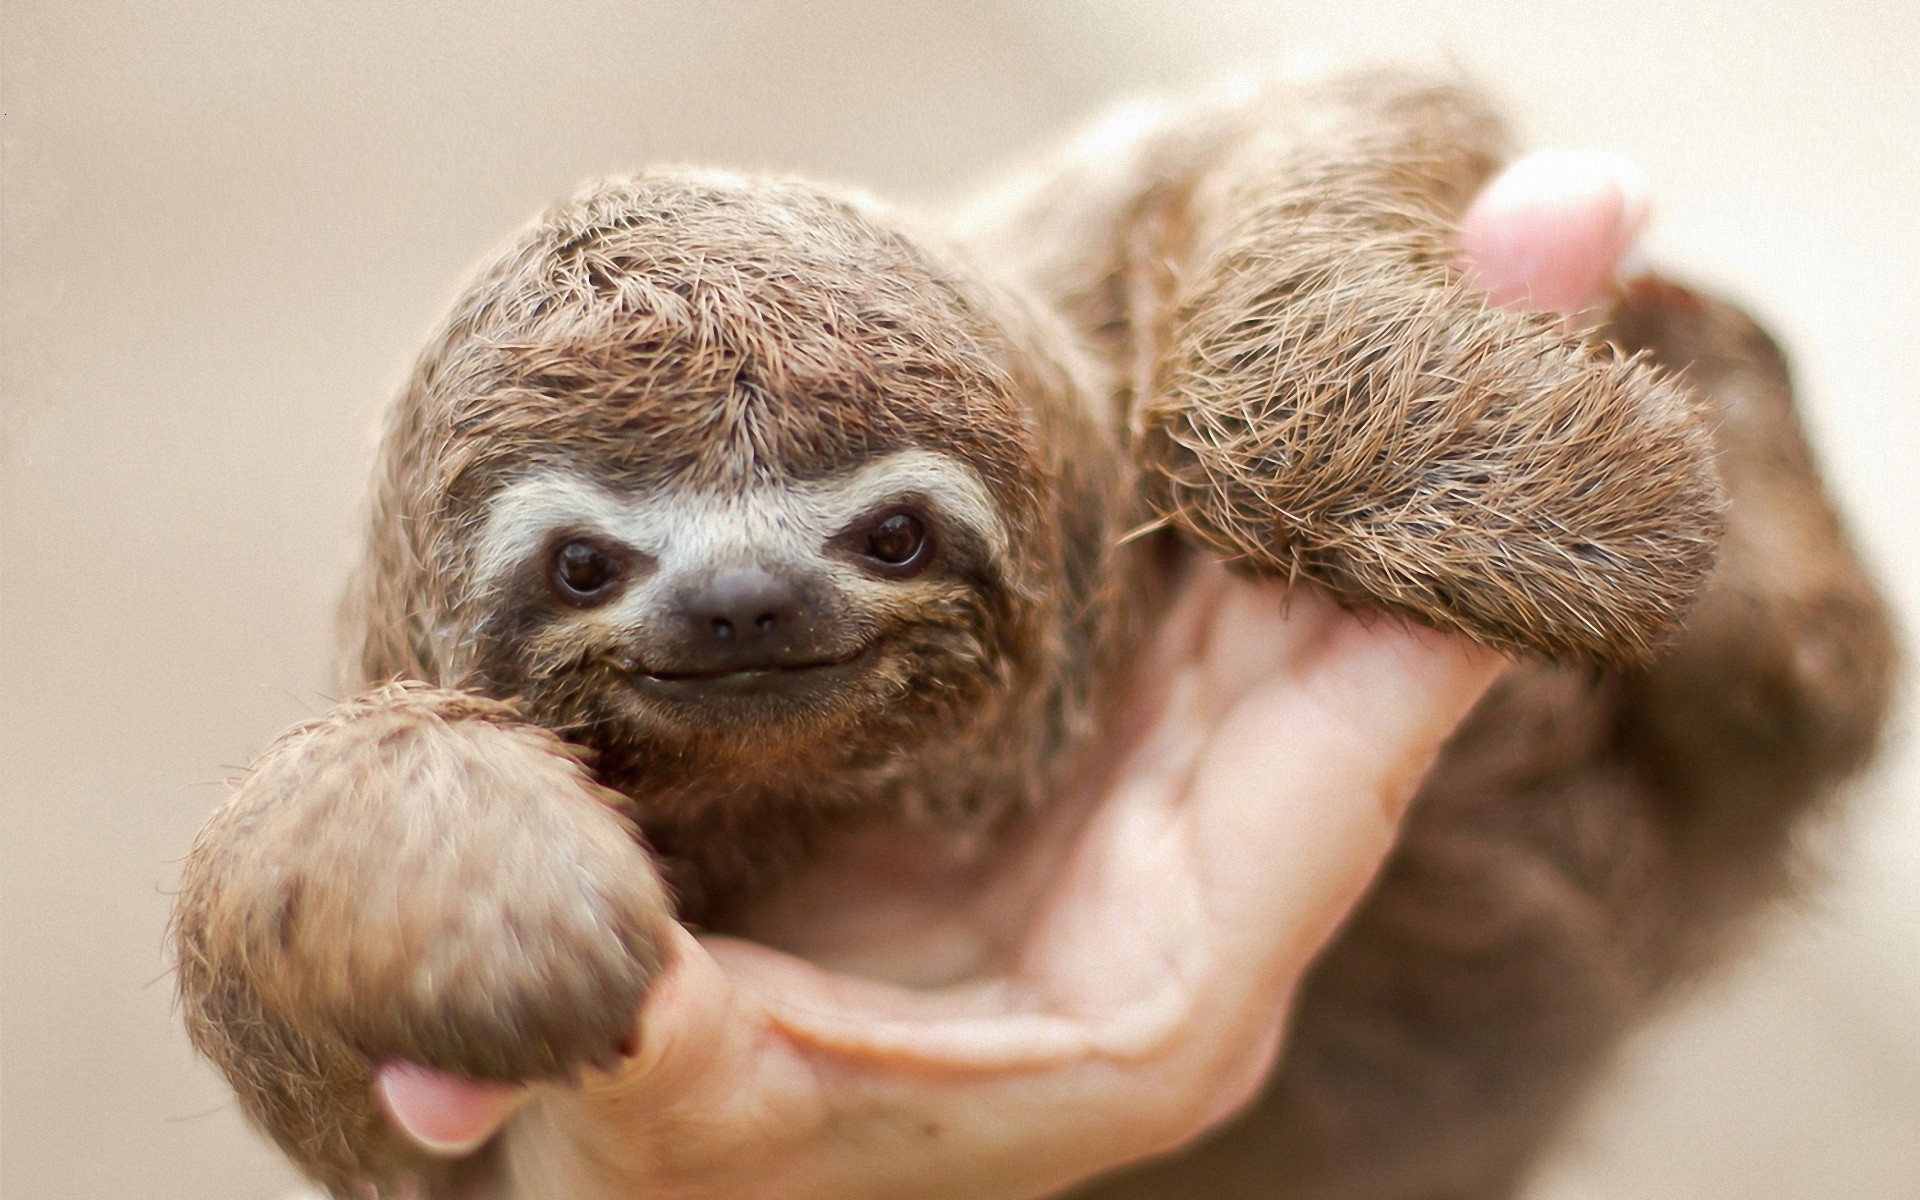 The sloth is looking at the camera